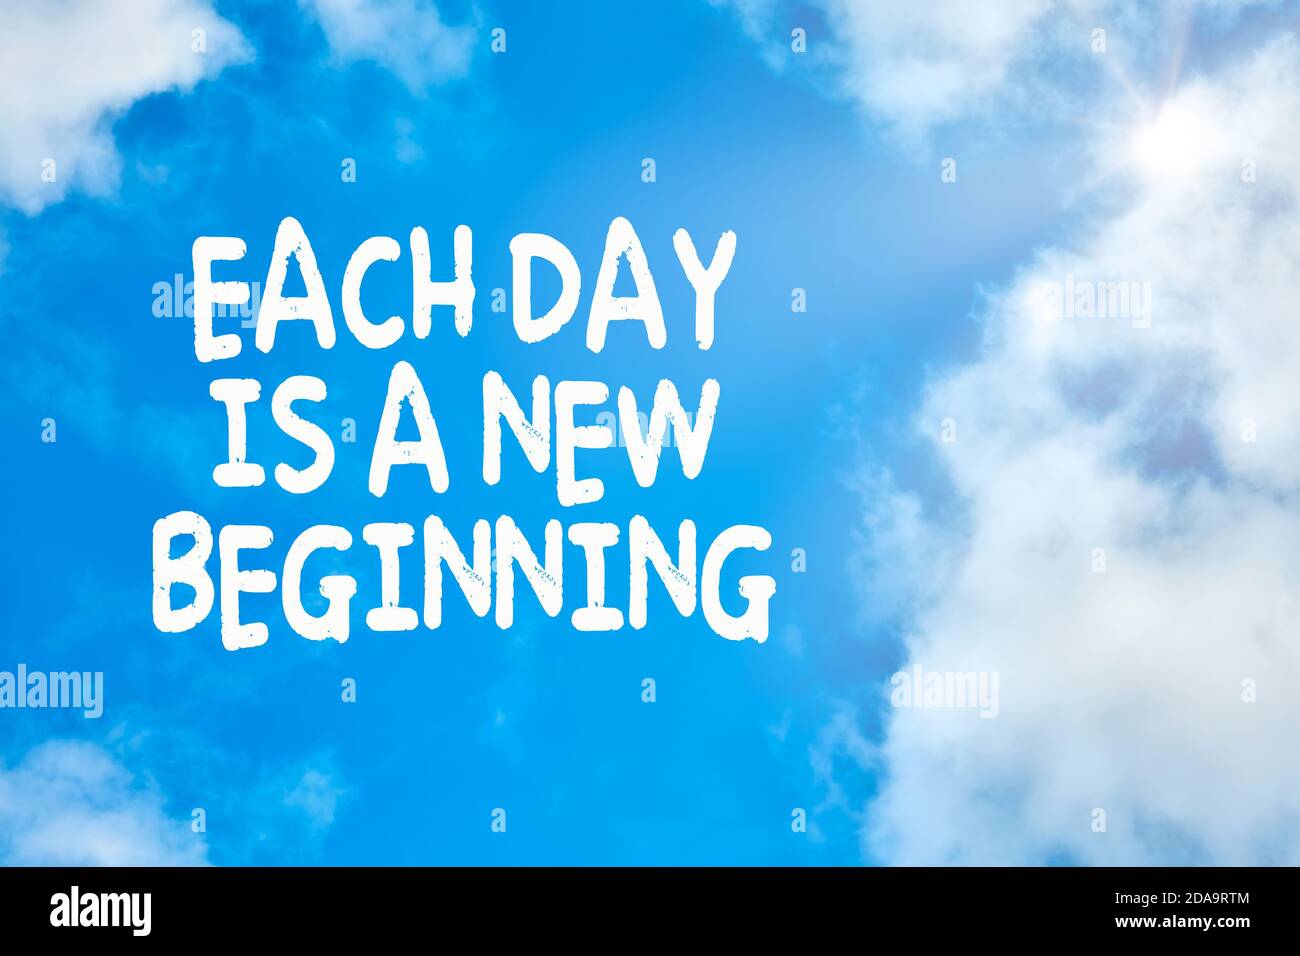 Each day is a new beginning motivational or inspirational quote against blue sky with clouds background. Stock Photo